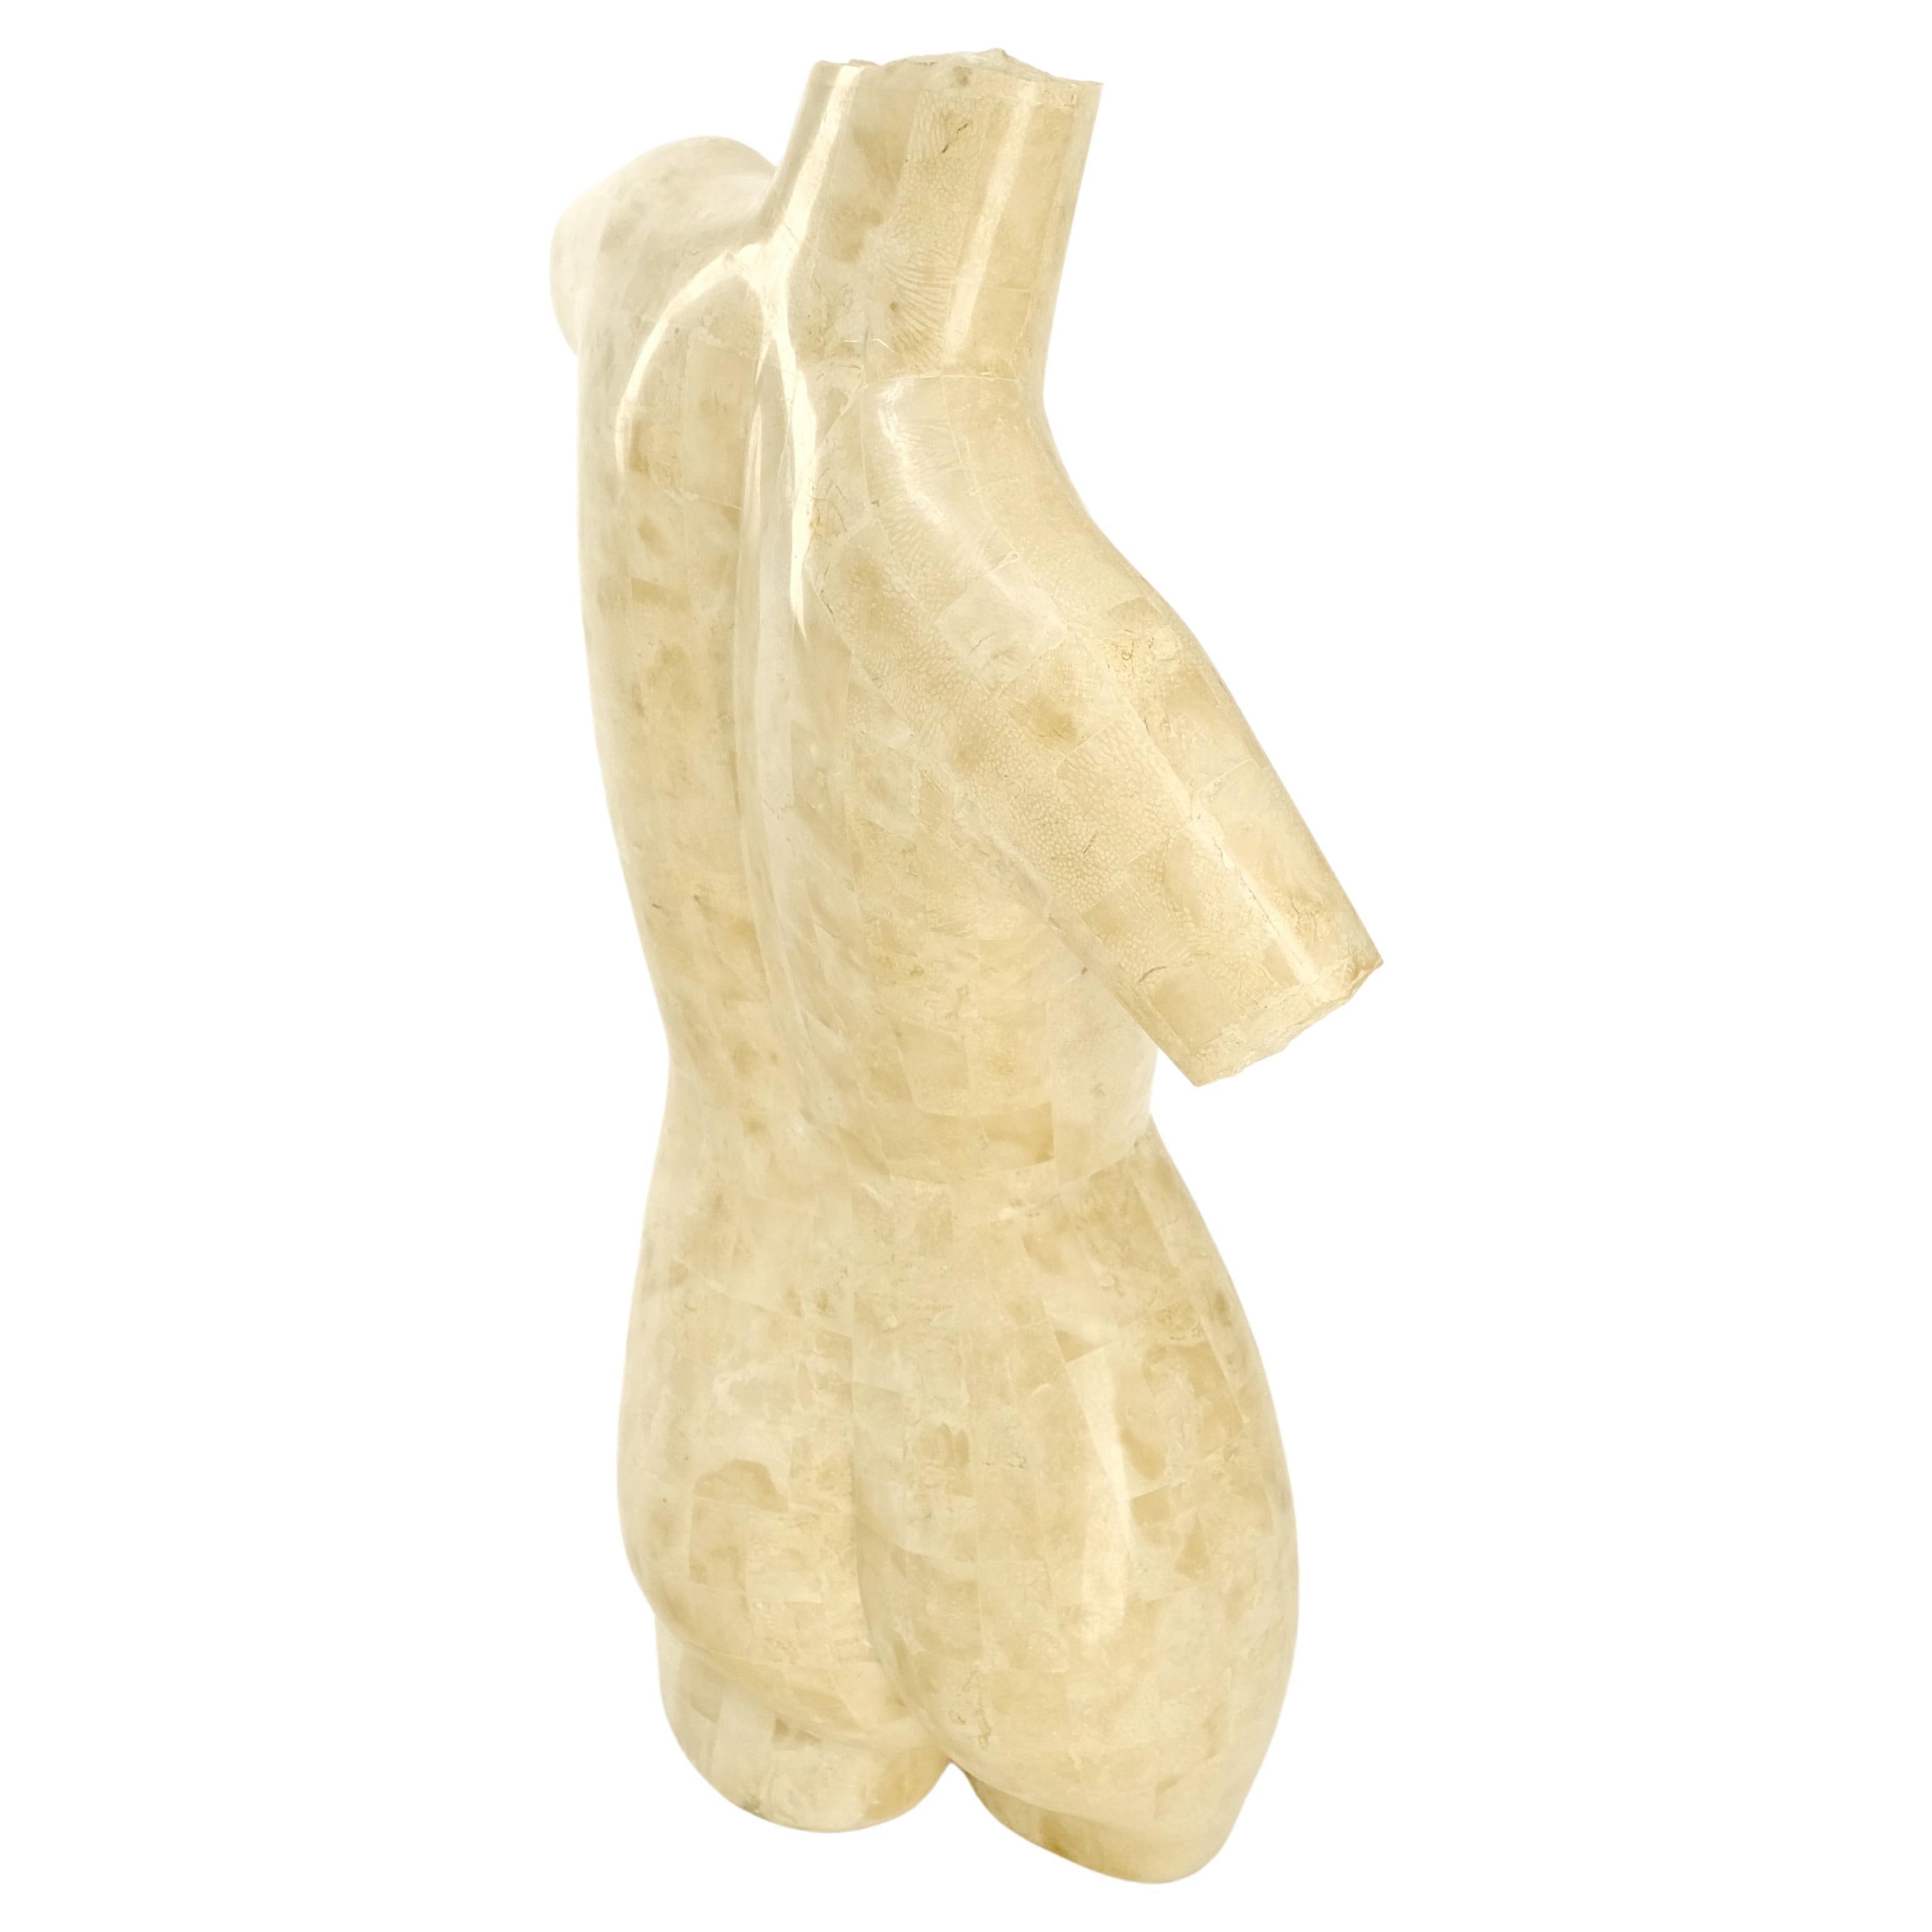 Unknown Tessellated Stone Marble Travertine Sculpture of Nude Female Torso Mint! For Sale